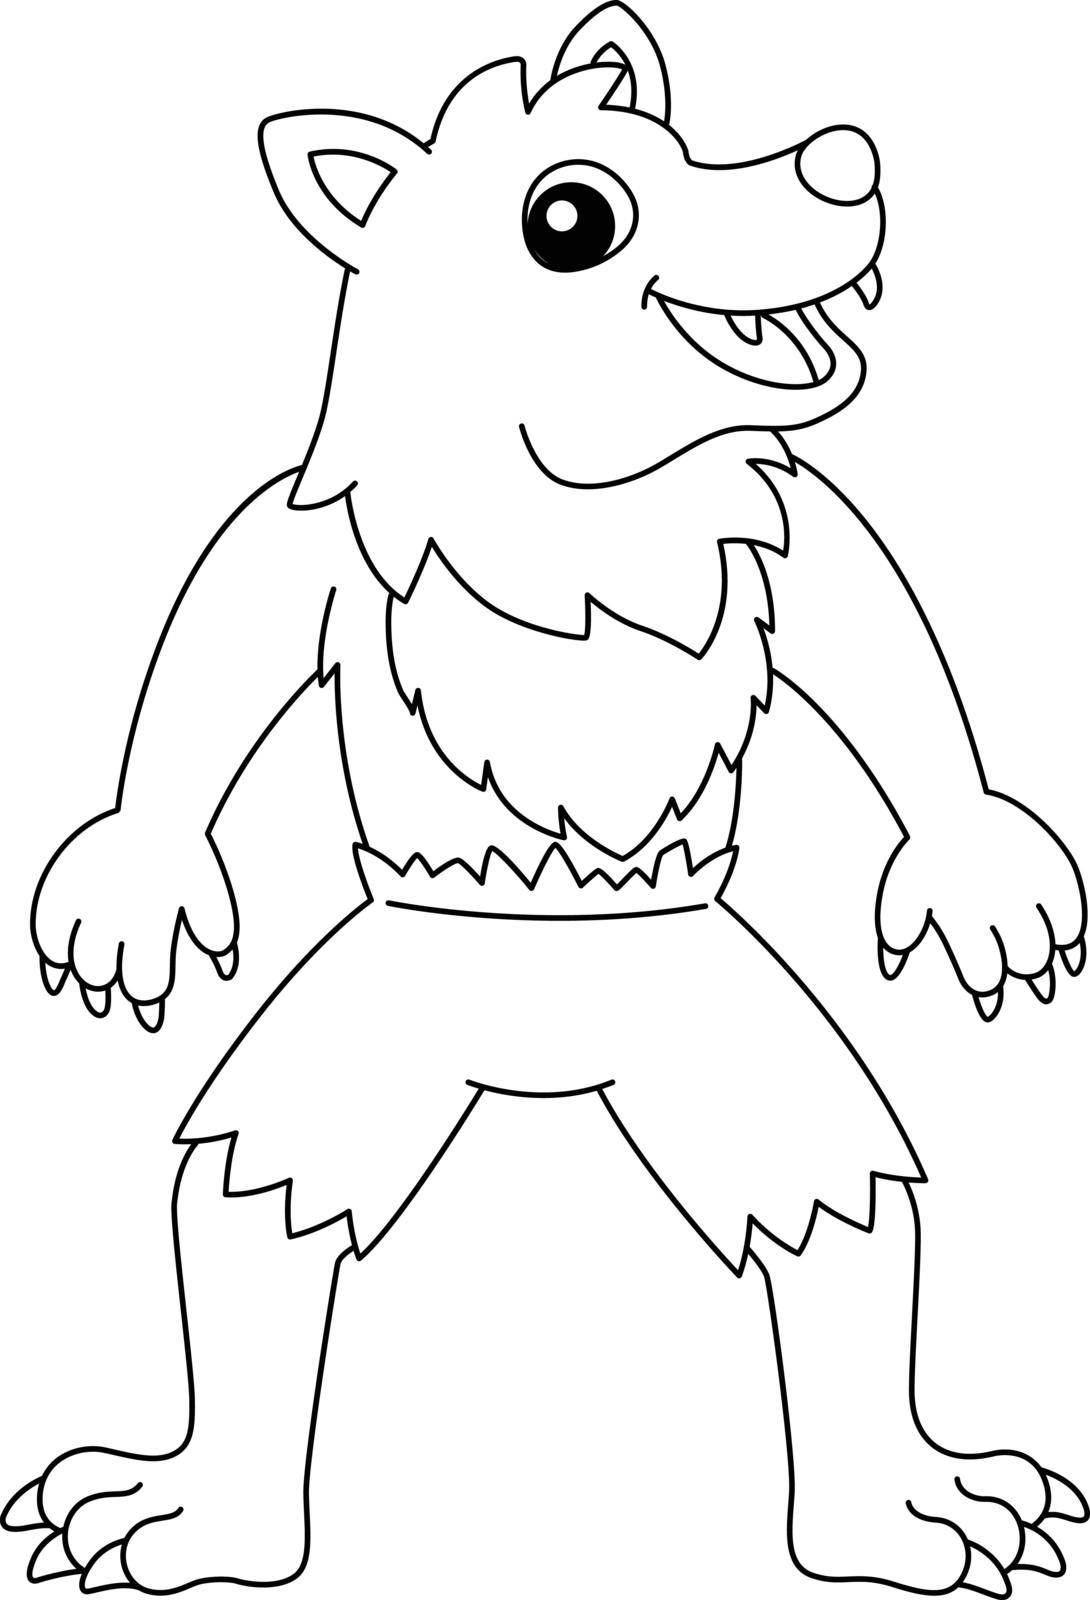 A cute and funny coloring page of a werewolf. Provides hours of coloring fun for children. To color, this page is very easy. Suitable for little kids and toddlers.